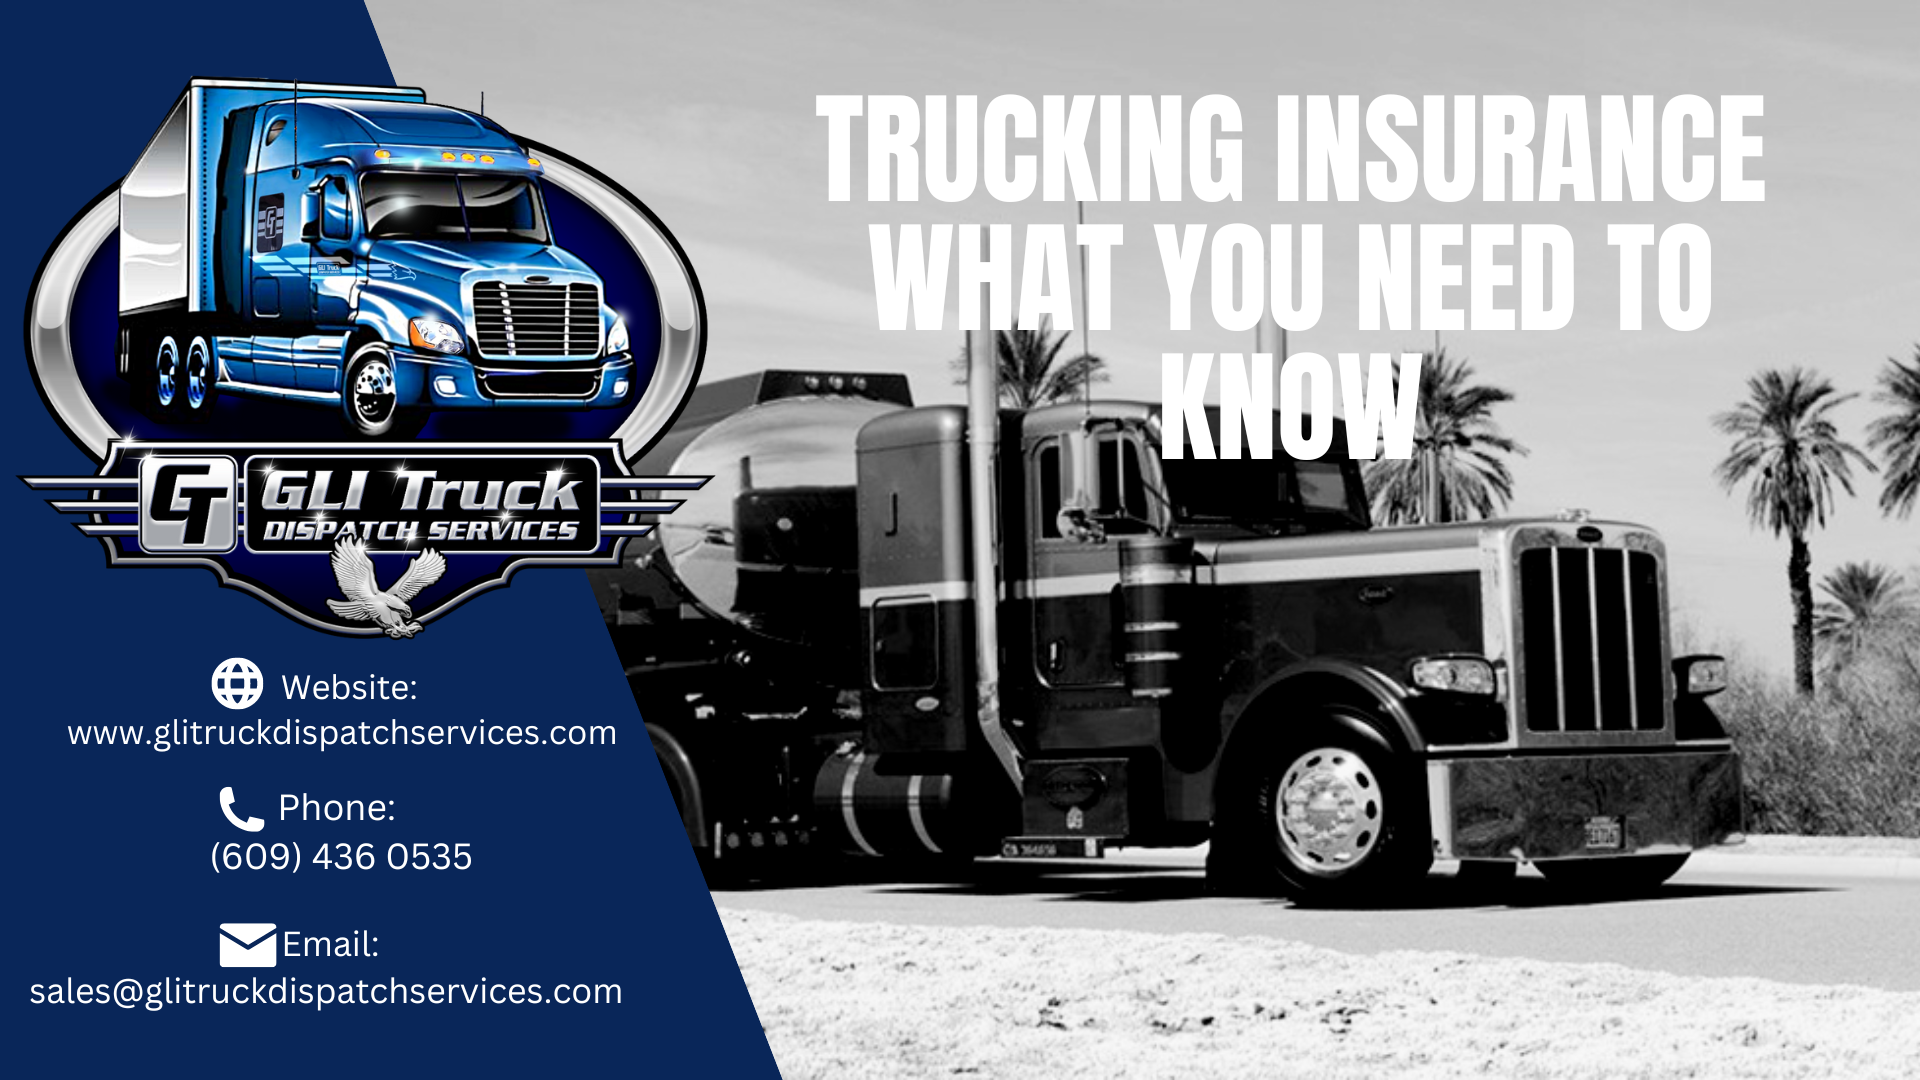 Trucking Insurance What You Need to know